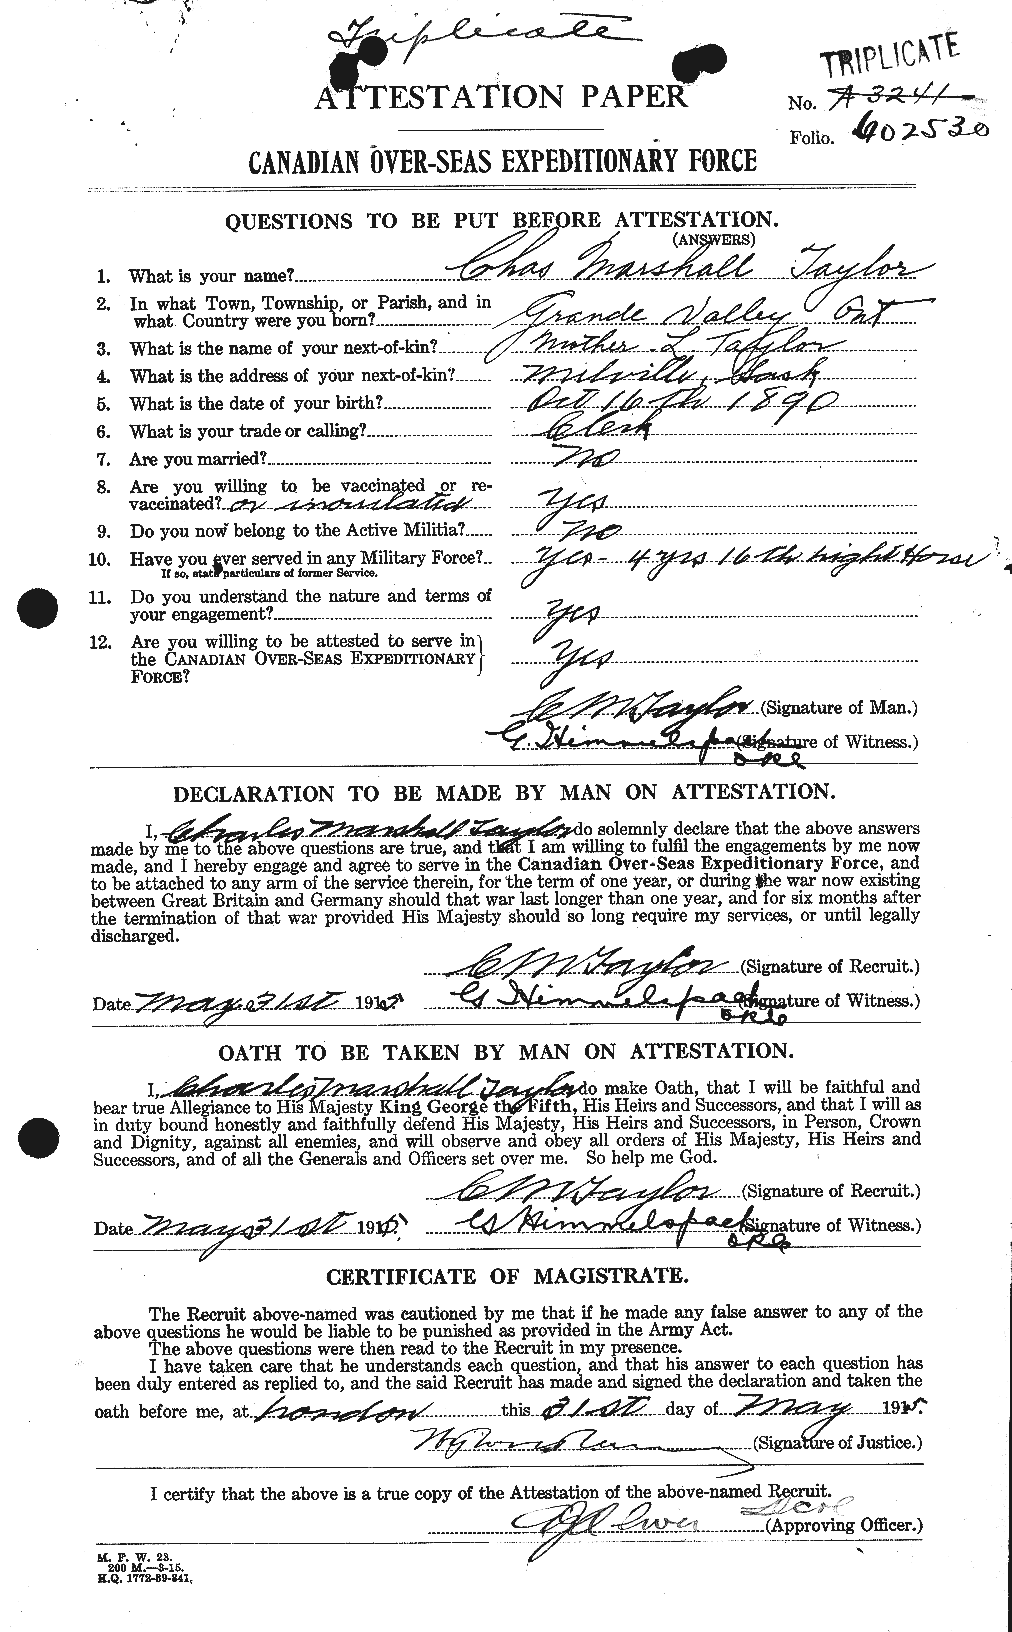 Personnel Records of the First World War - CEF 626868a